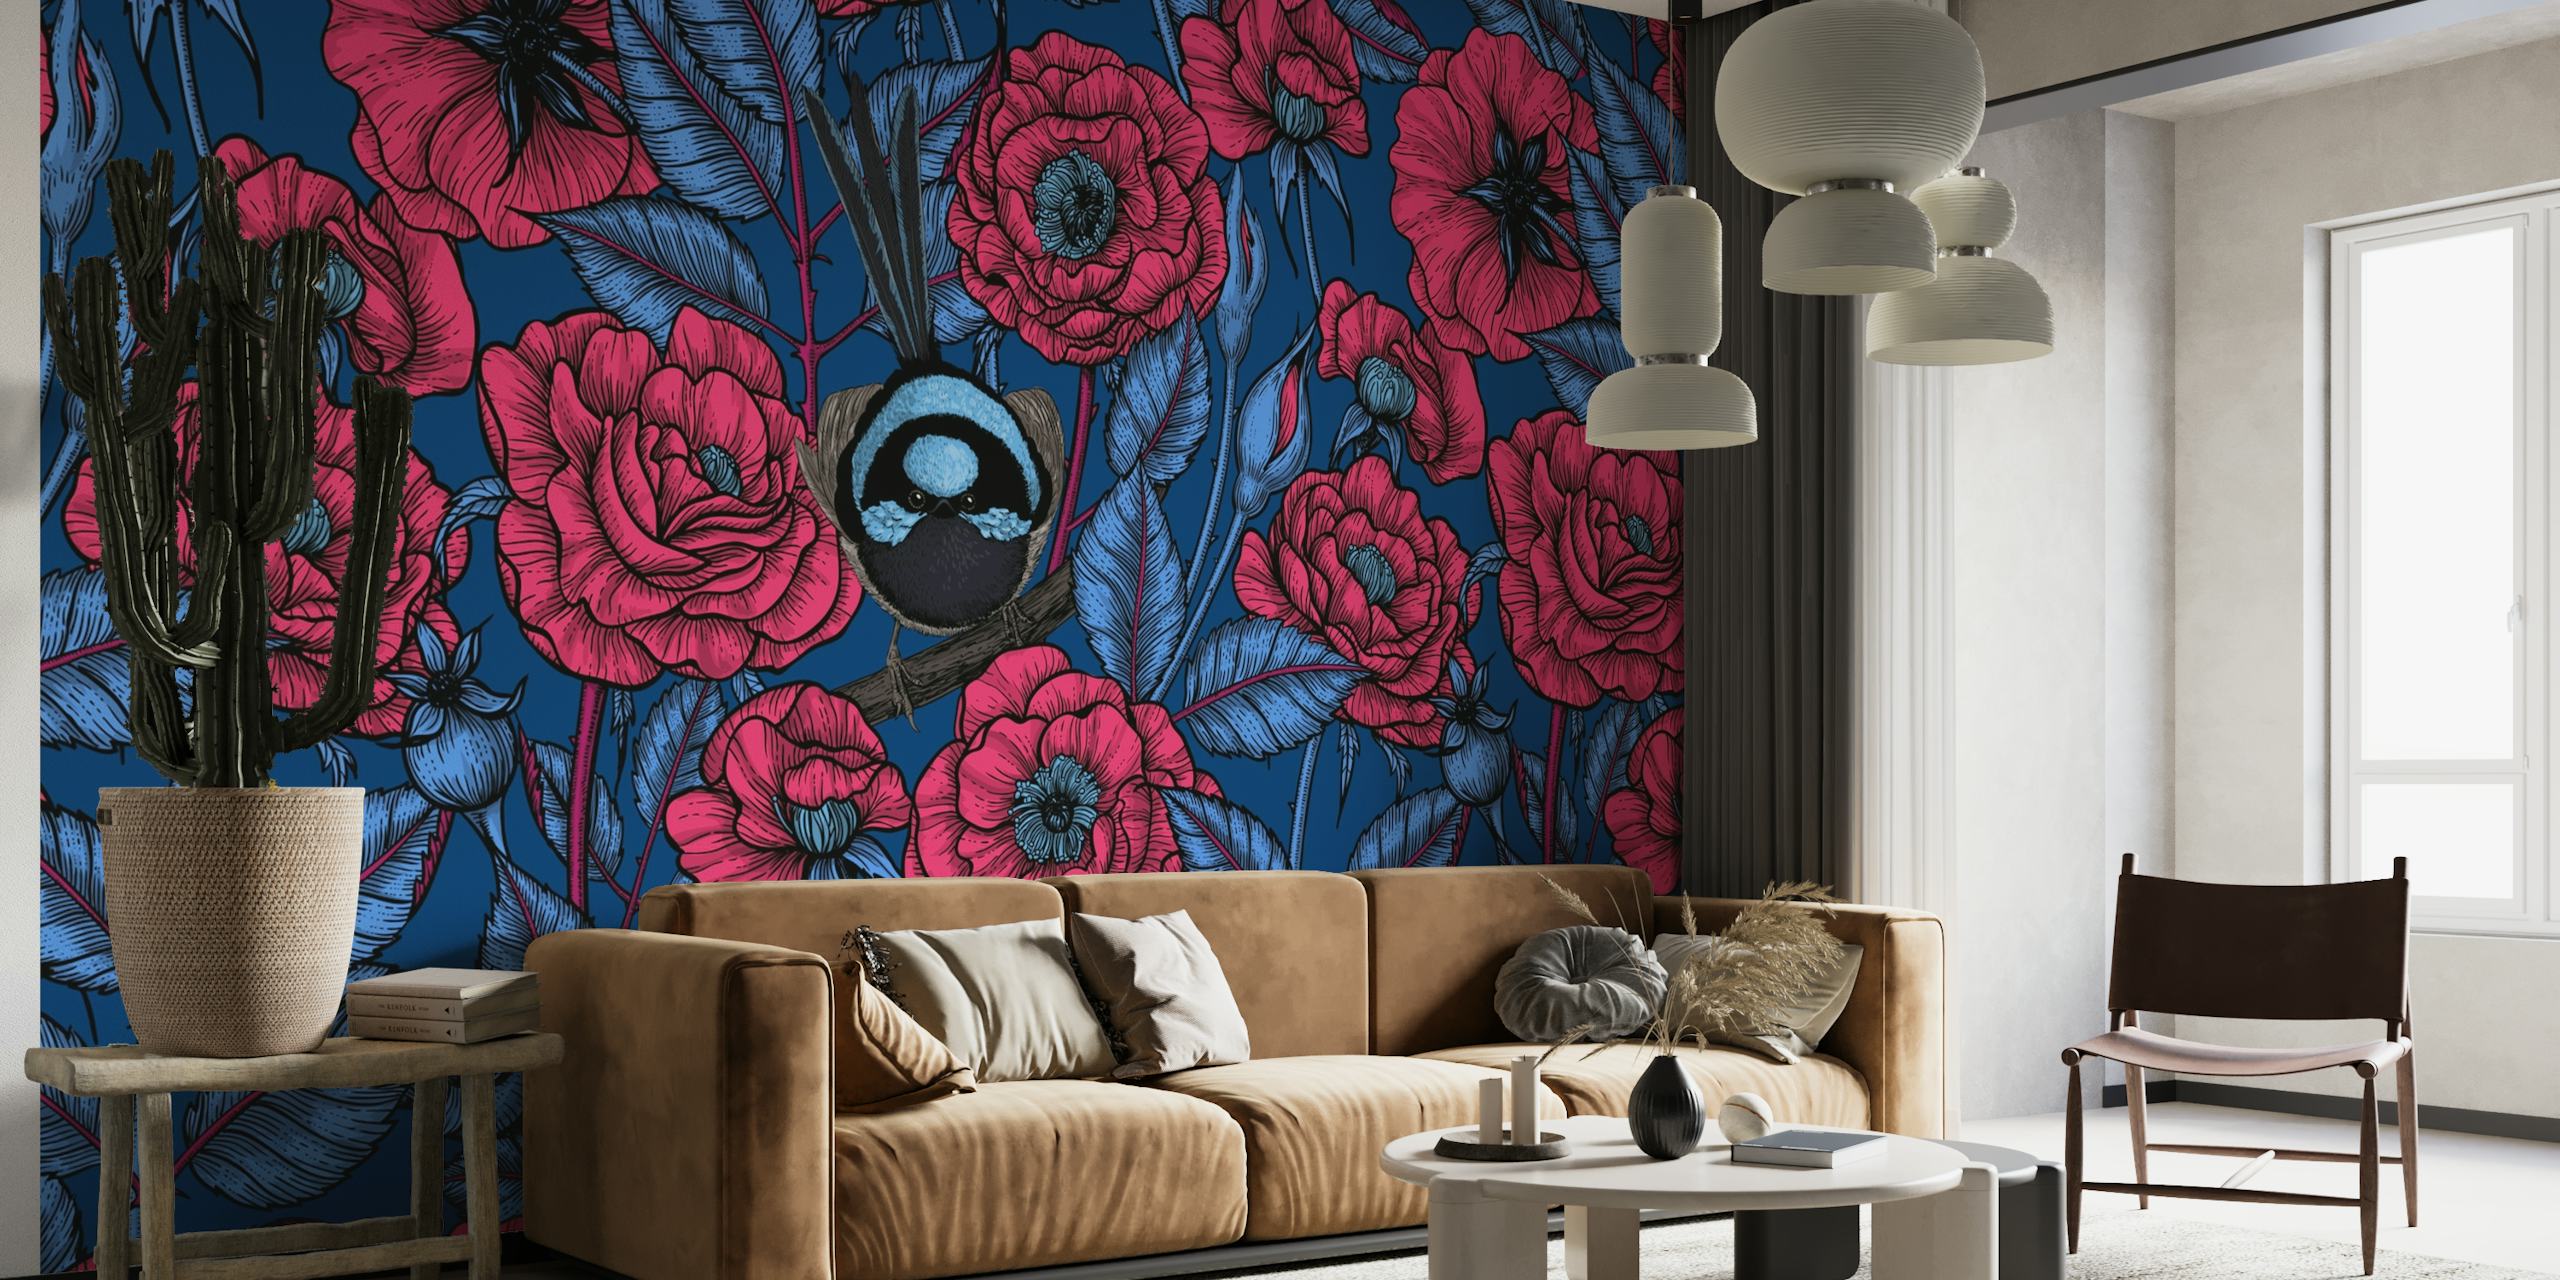 Wall mural of a wren sitting among red roses on a blue background